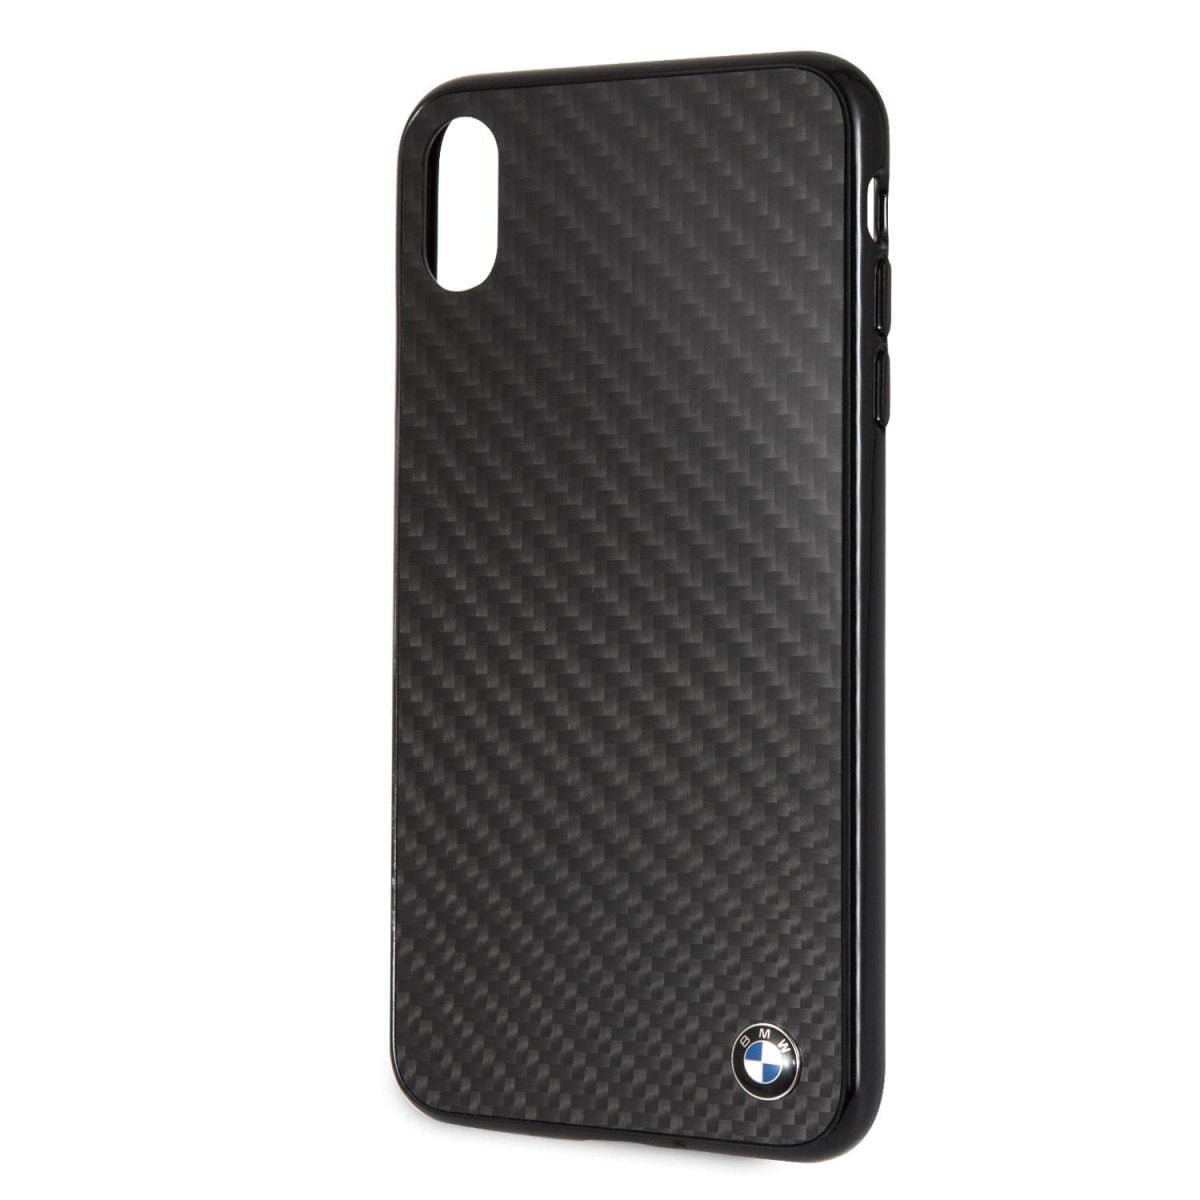 Cg Mobile Bmw Iphone Xs Max Case Black Carbon Hard Cell Phone Case Carbon Fiber Easily Accessible Ports Officially Licensed 03 غطاء آيفون ايفون Xs ماكس ألياف الكربون السوداء (Bmw)